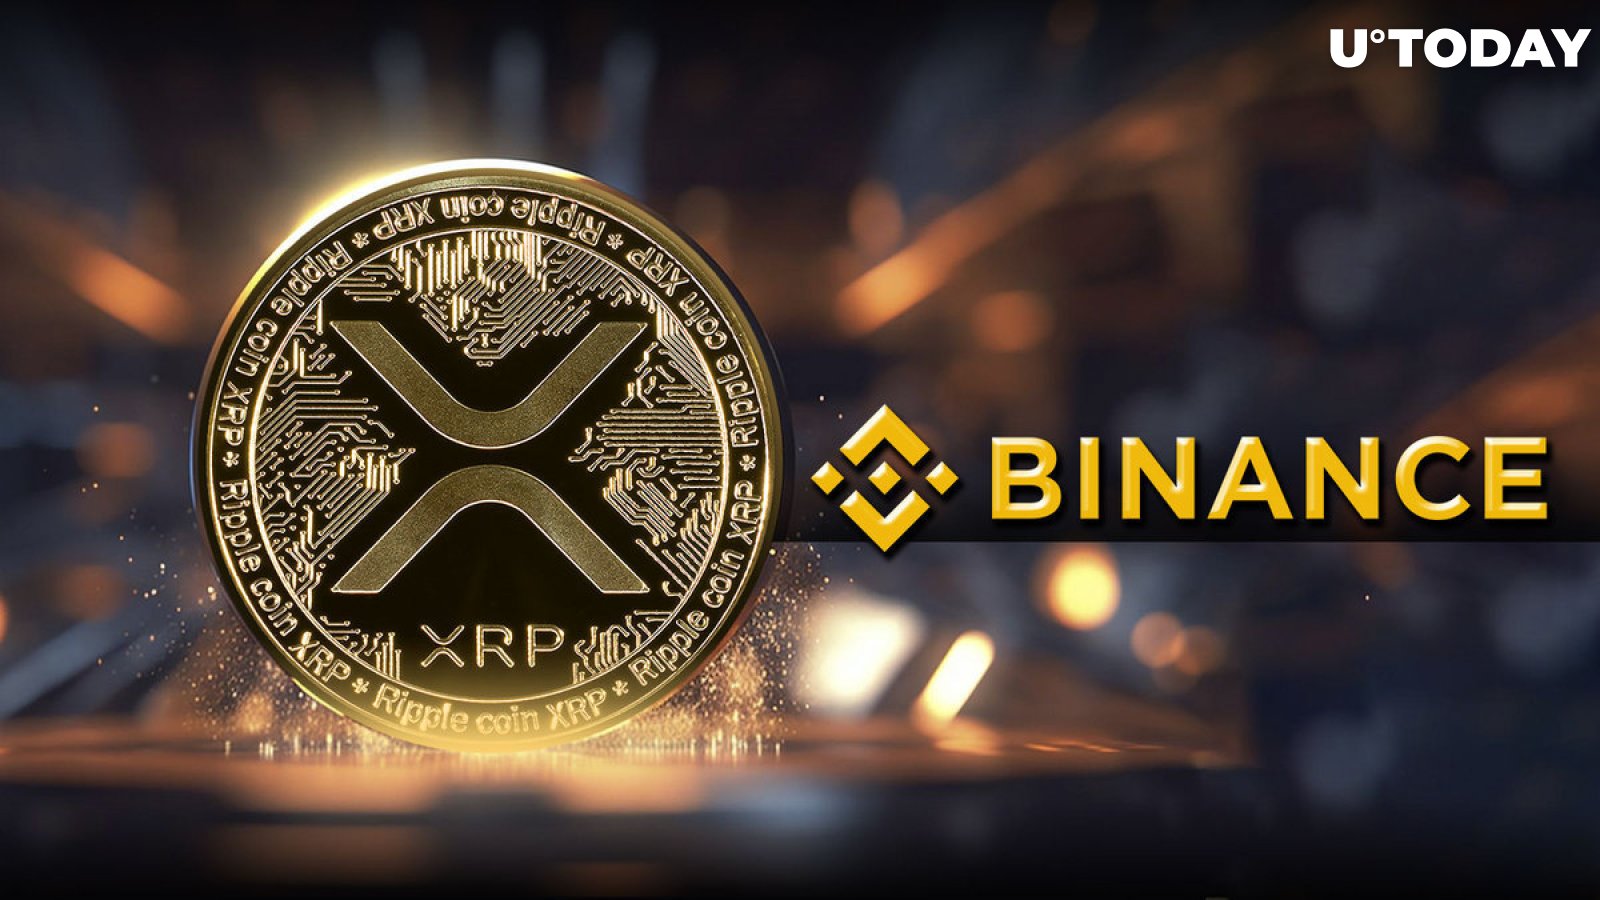 Binance Makes XRP Announcement, Here's What It Is